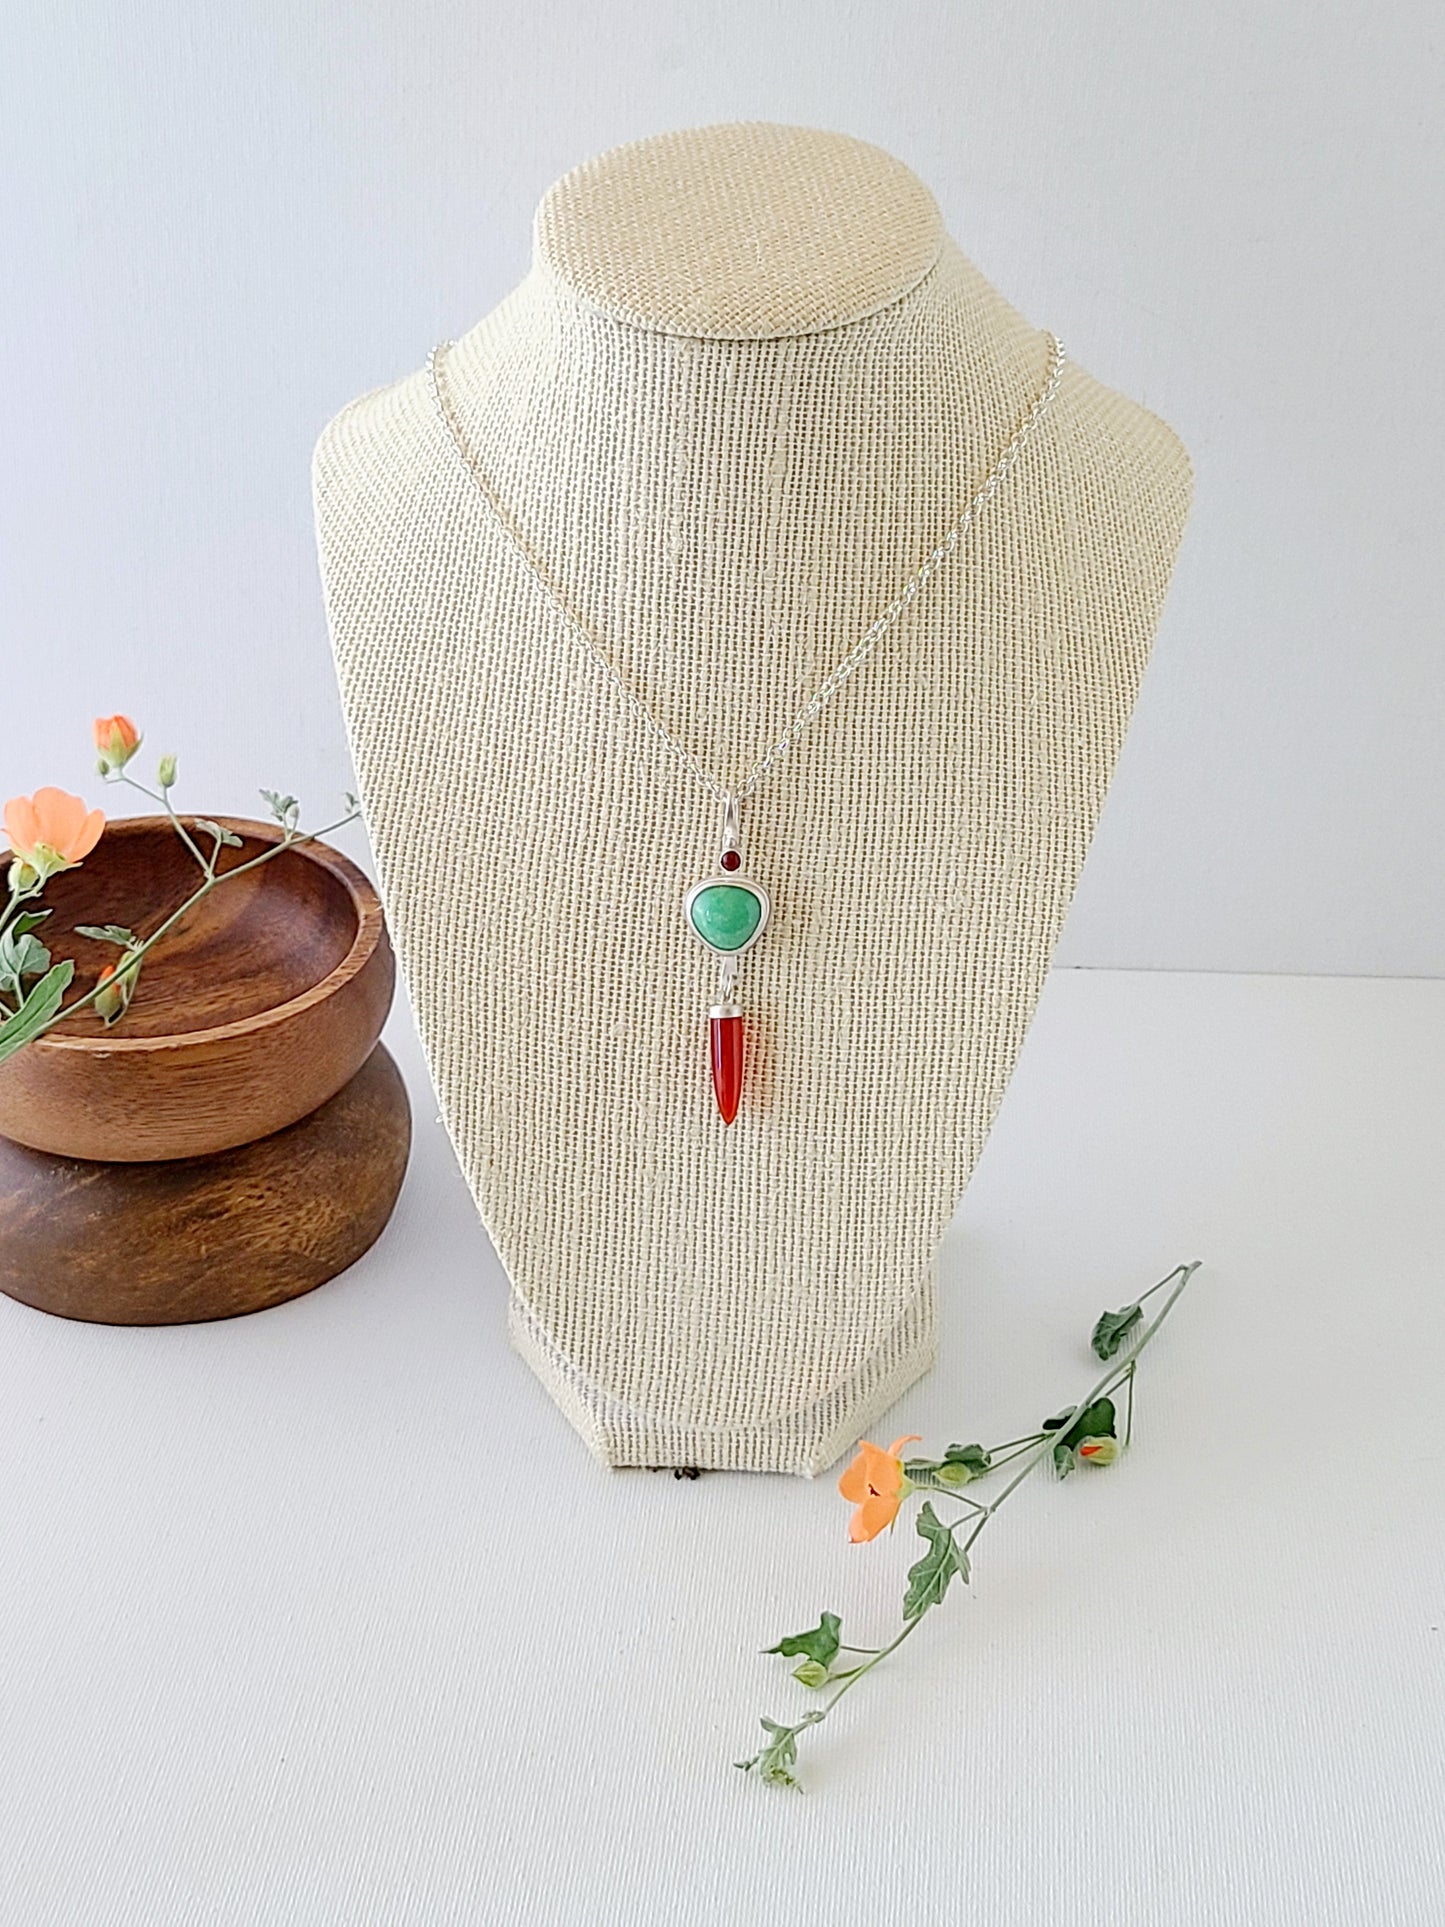 Dagger Necklace with Carnelian and Variscite-mint green